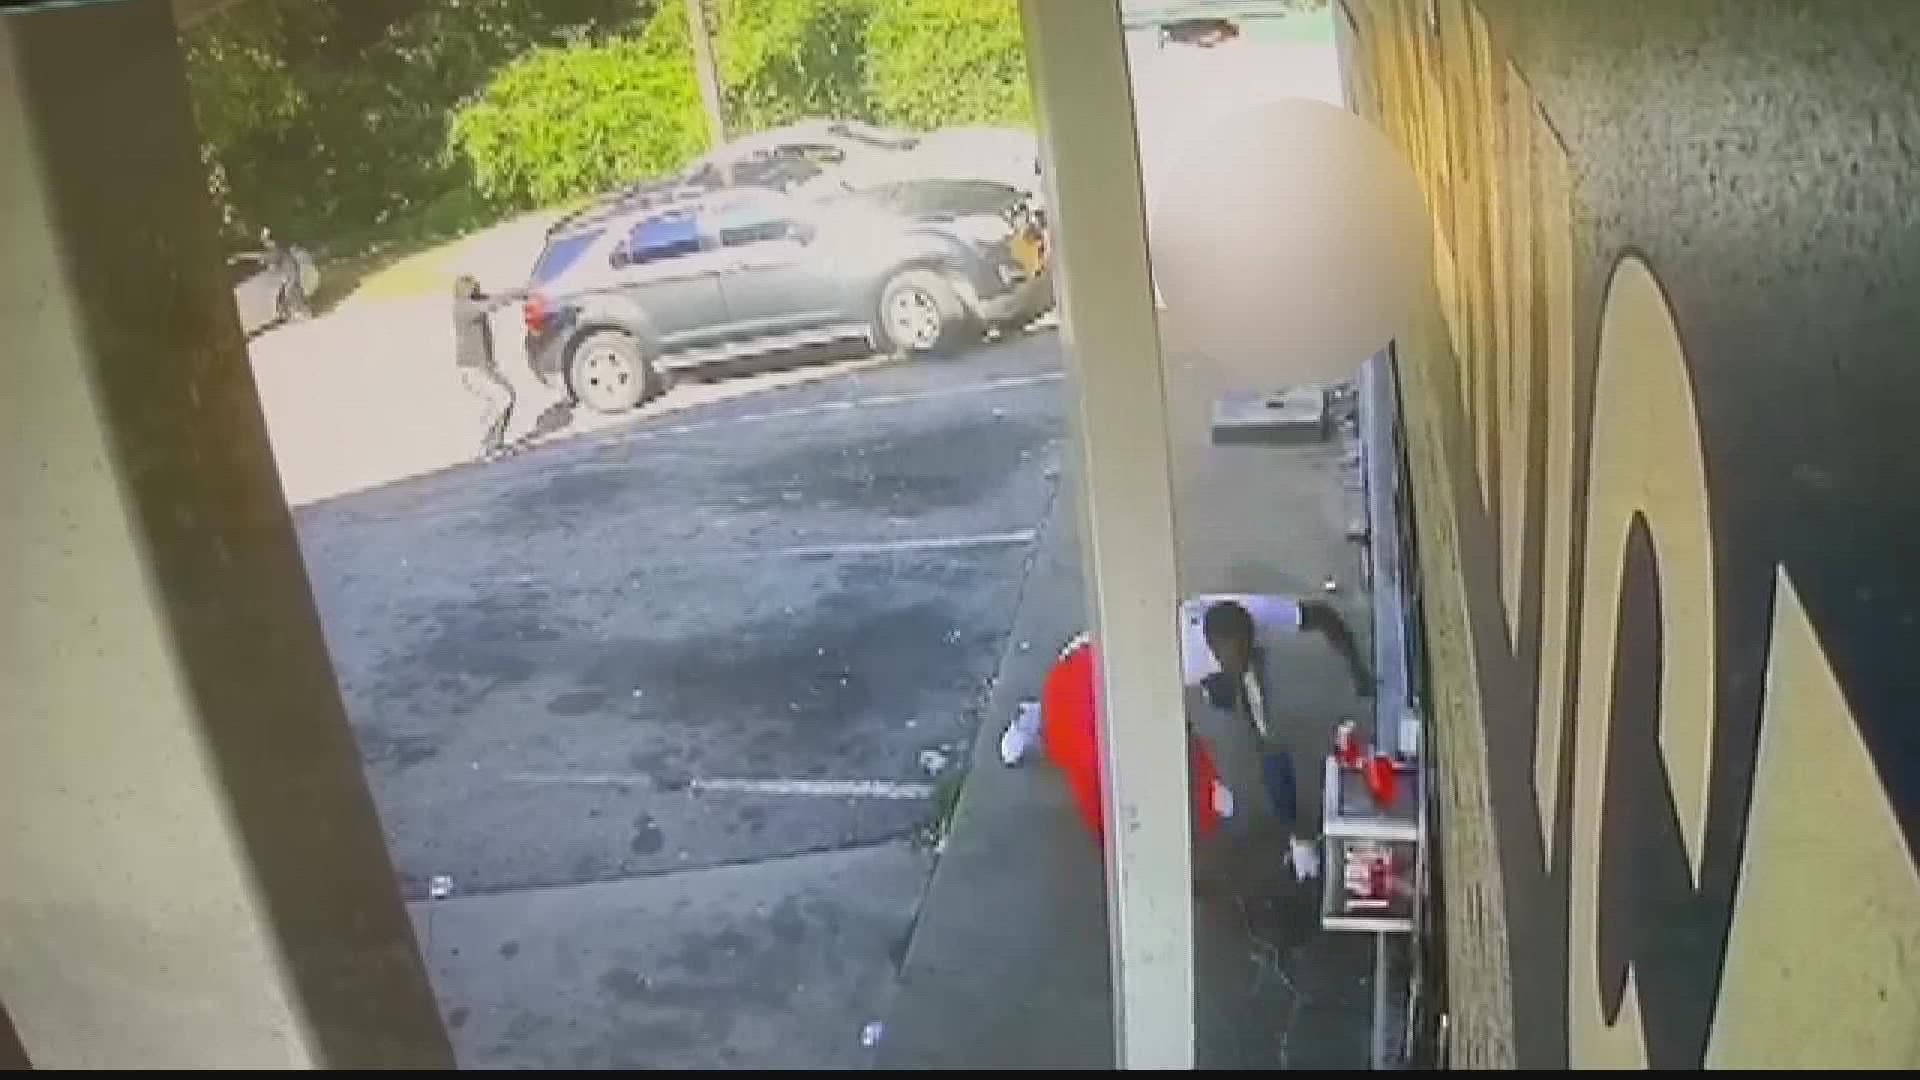 Surveillance video shows the shooting played out in a matter of seconds.